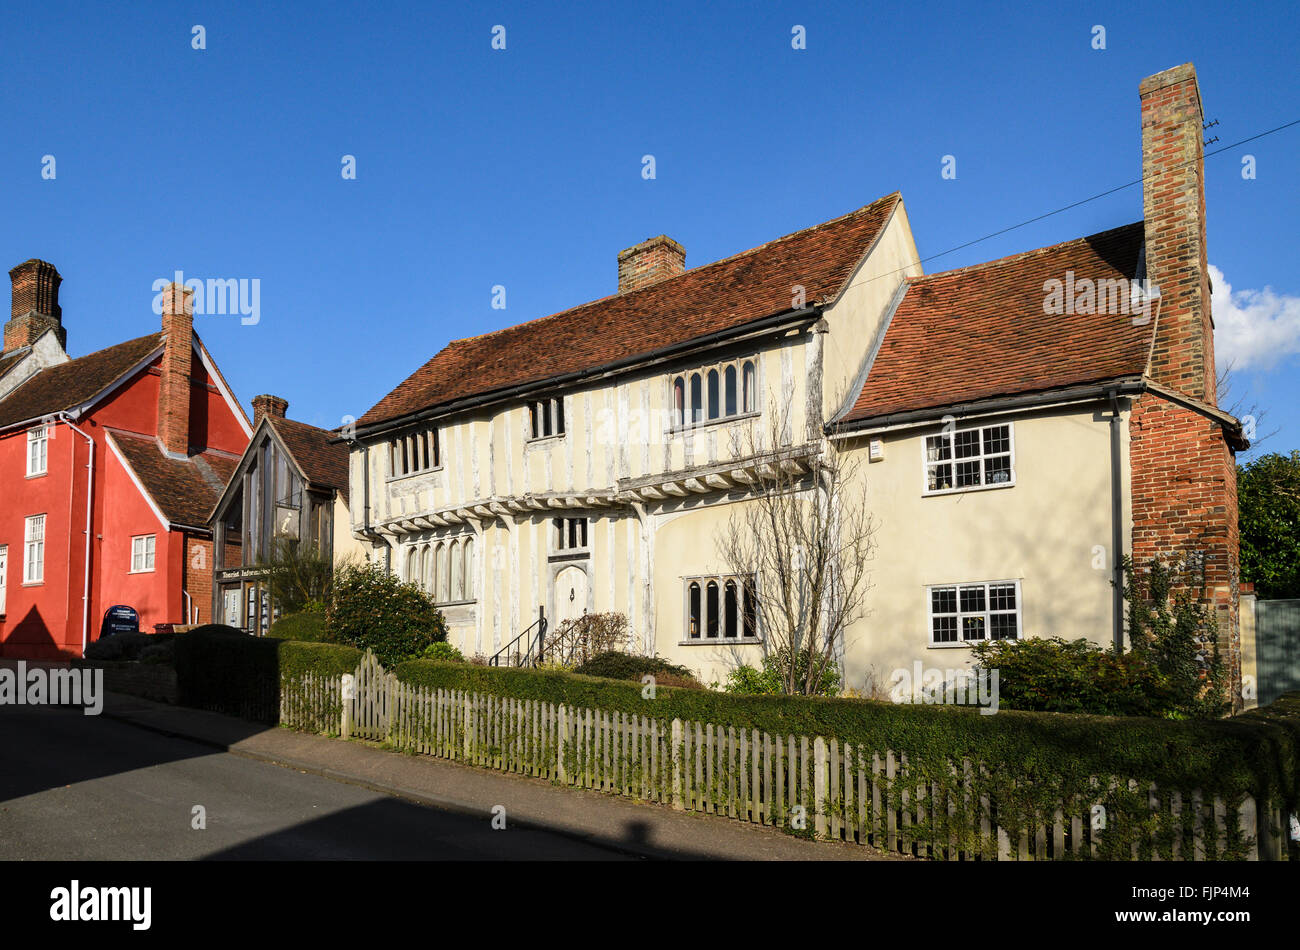 A house in the picturesque market town of Lavenham, Suffolk, England, UK. Stock Photo